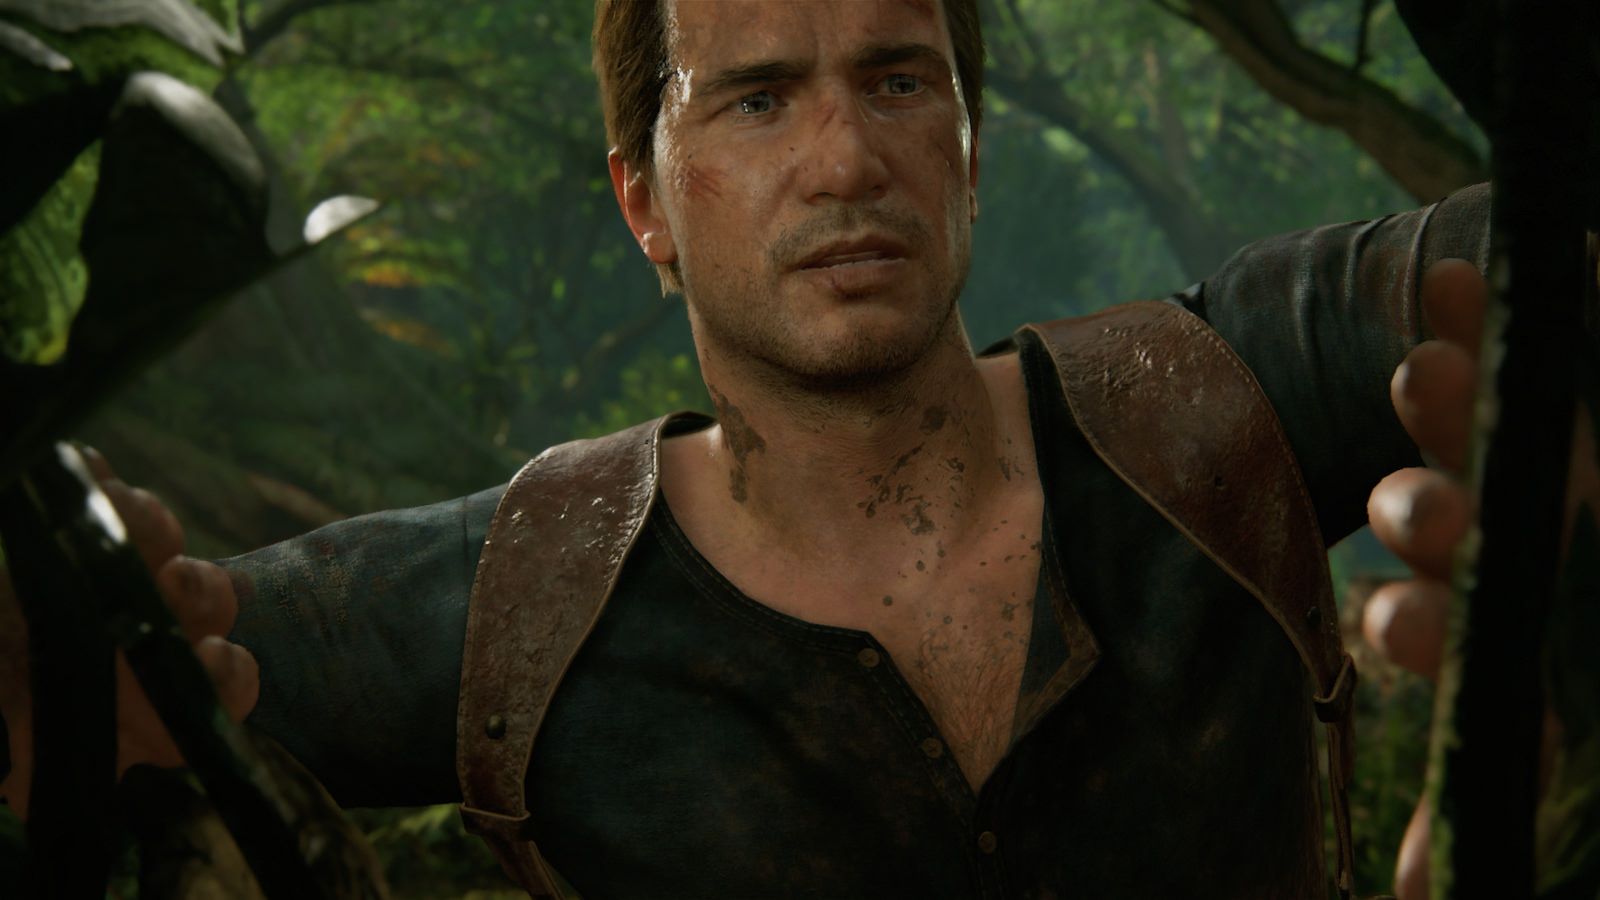 Angry Gamers Petition To Have Uncharted 4 Review Score Removed From  Metacritic - SlashGear